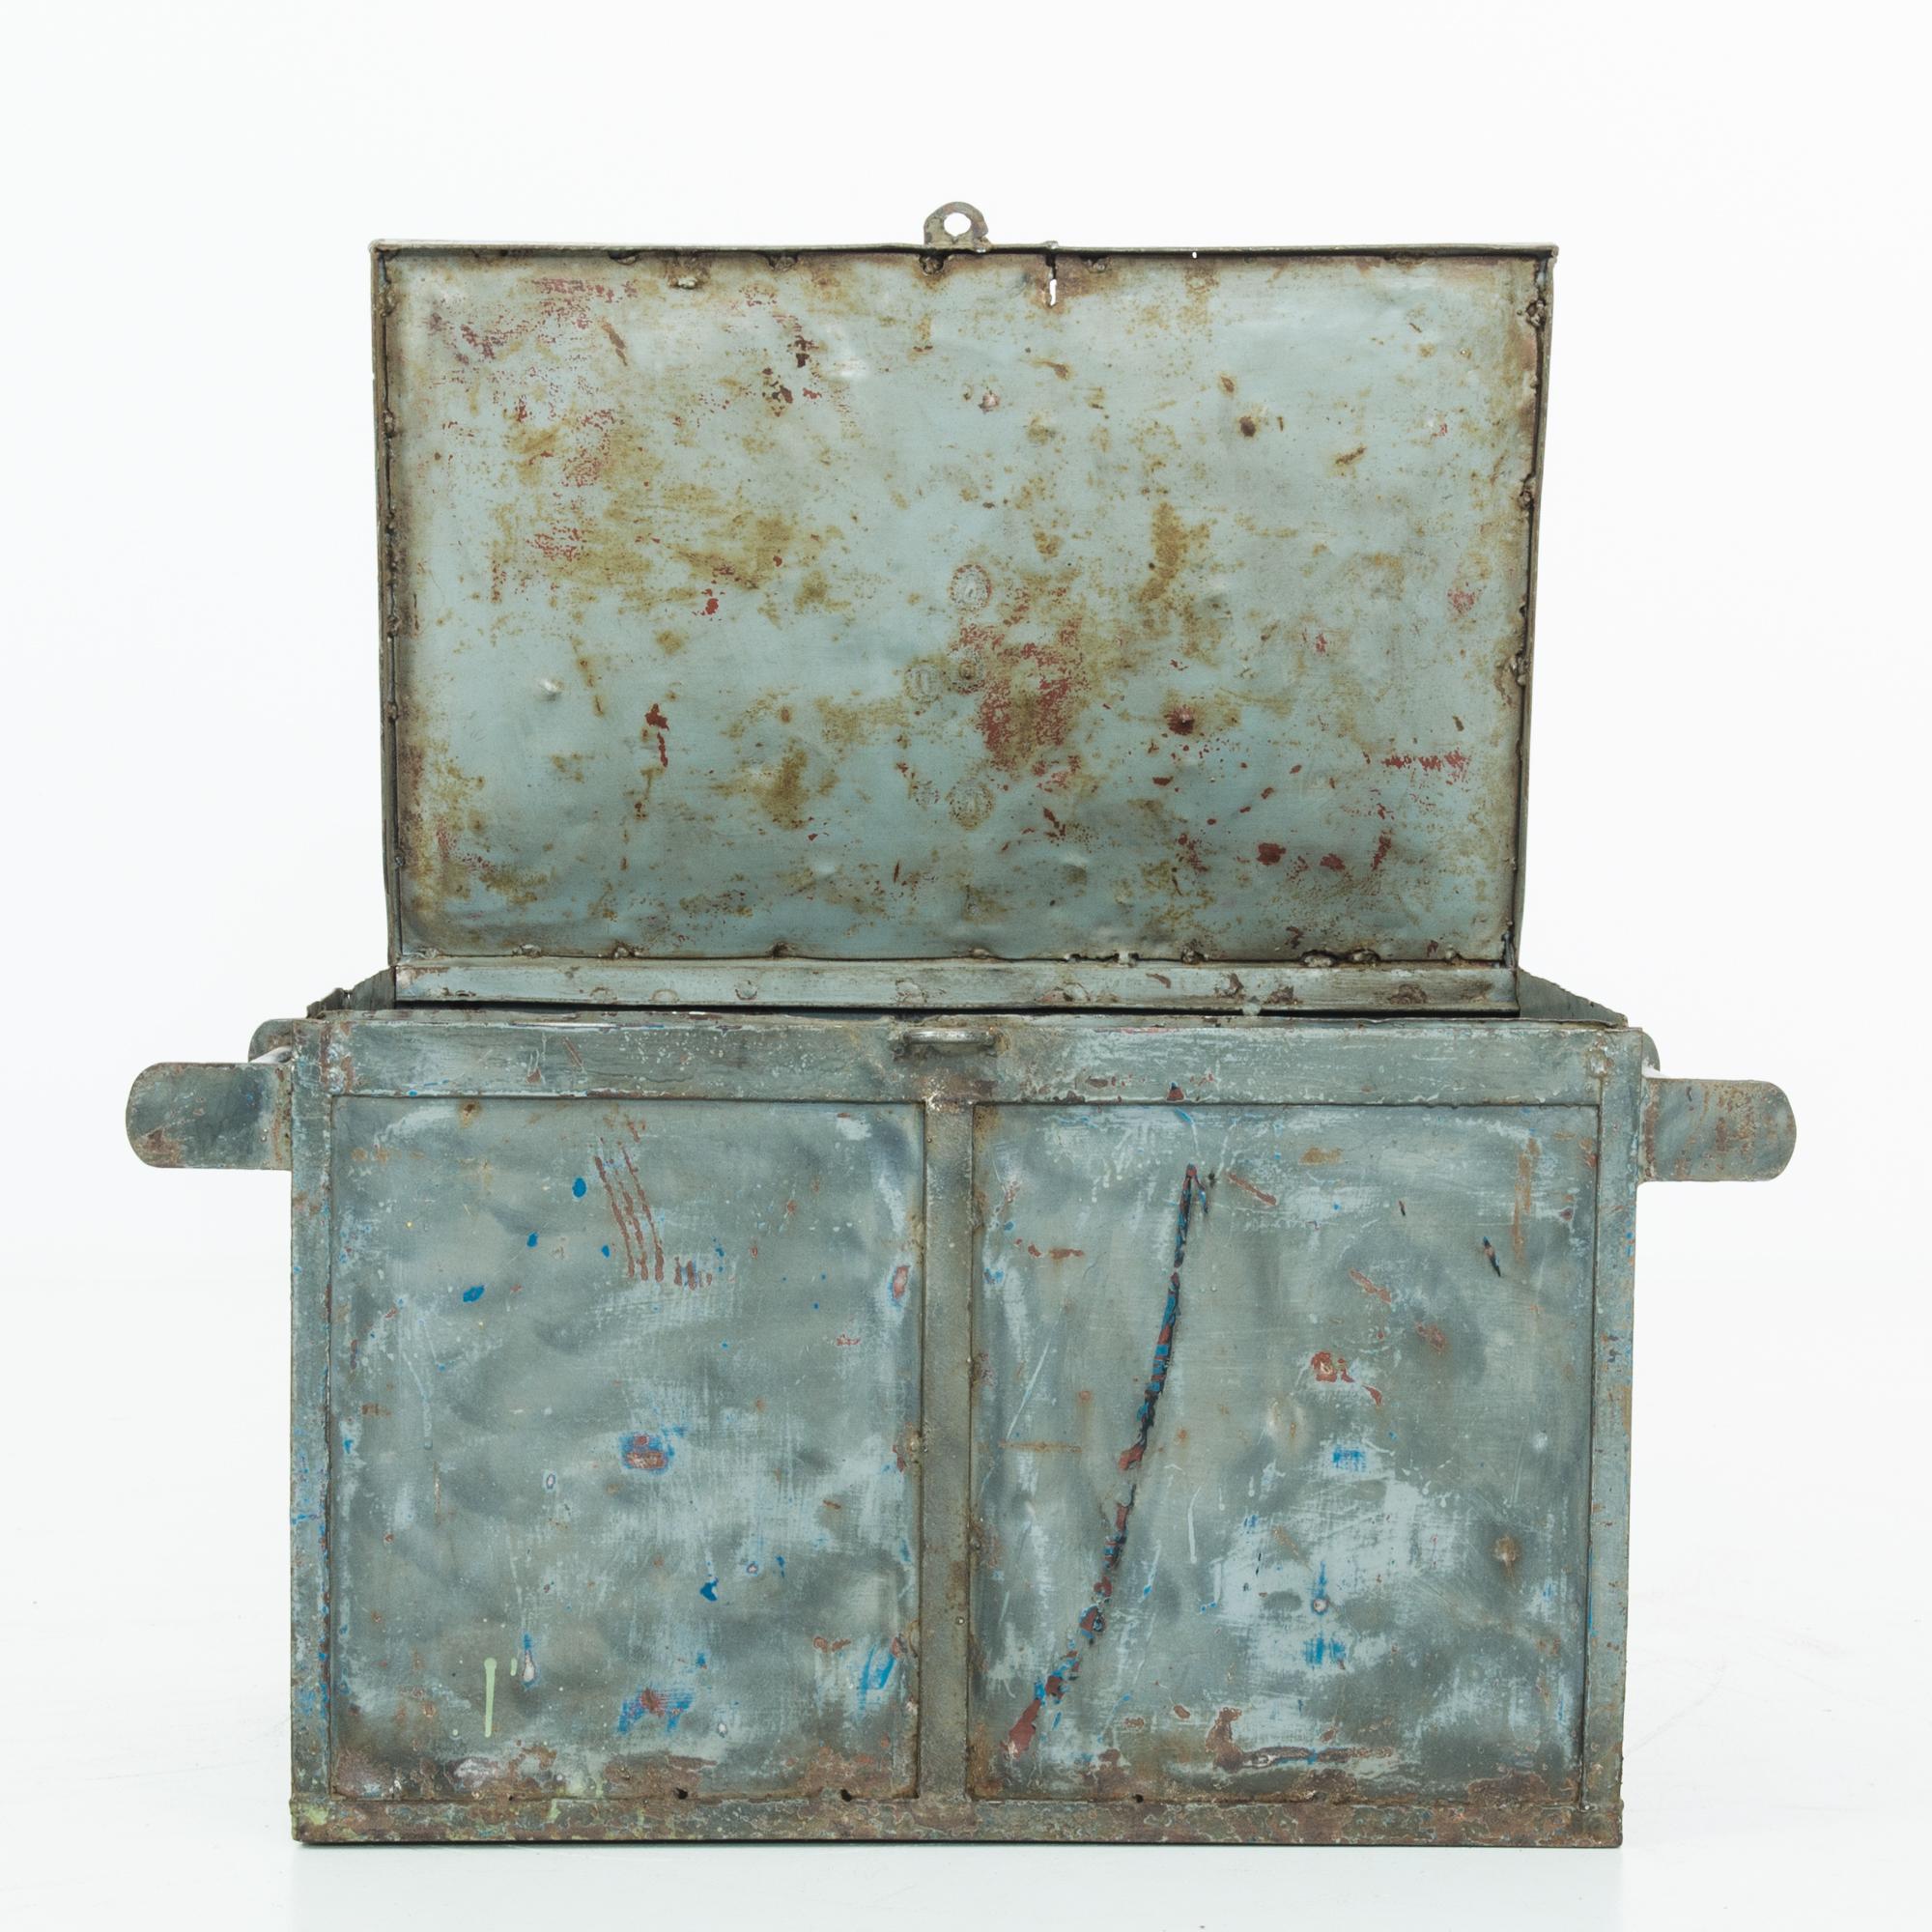 This 1960s Czech Metal Trunk is a true testament to the era's craftsmanship and utilitarian design. The trunk's robust metal construction speaks of durability, while its weathered blue patina and visible signs of wear add an authentic industrial